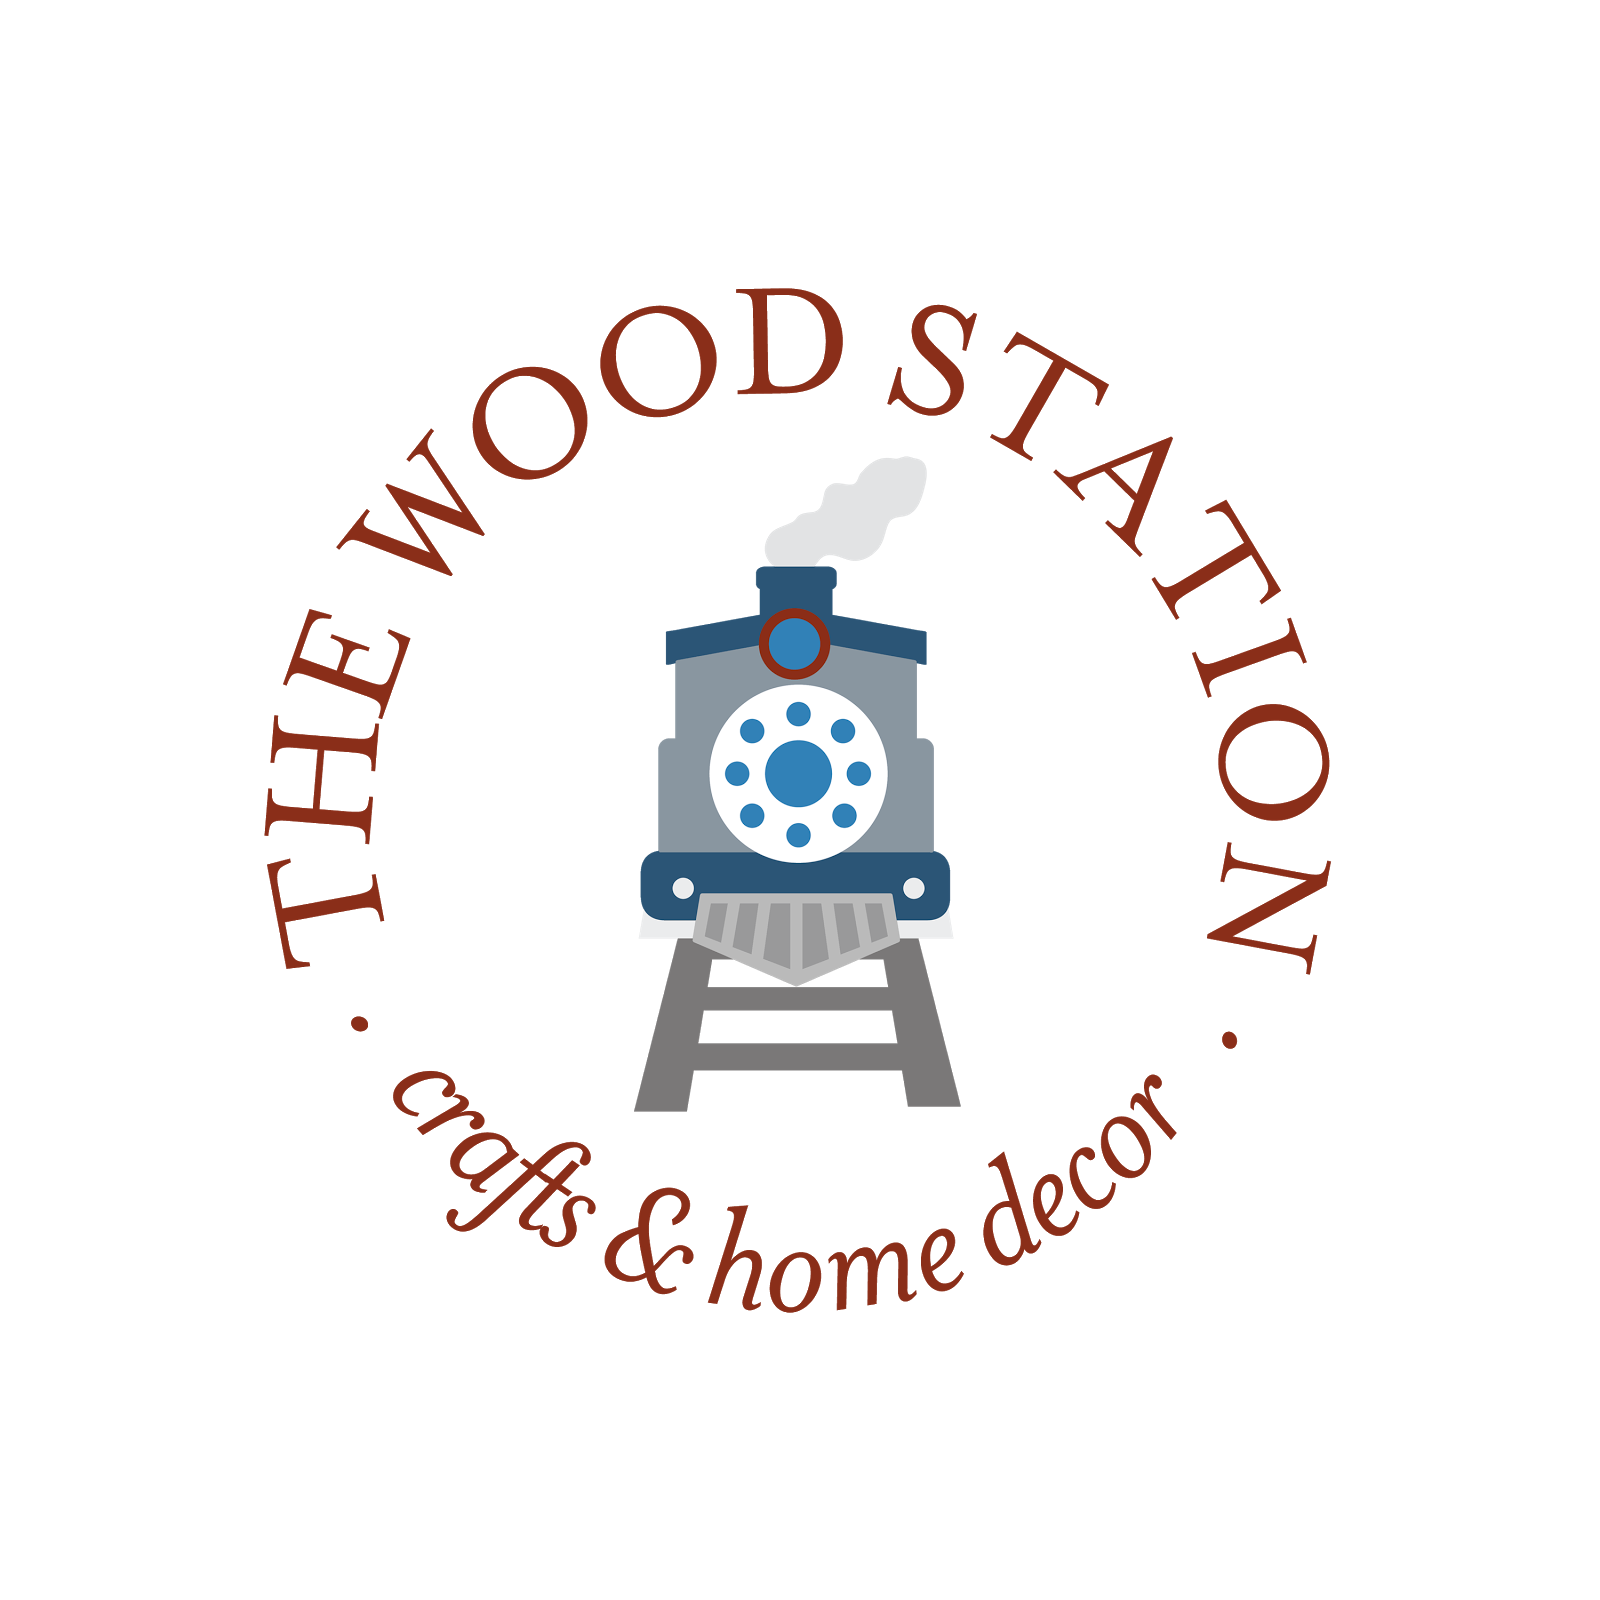 THE WOOD STATION